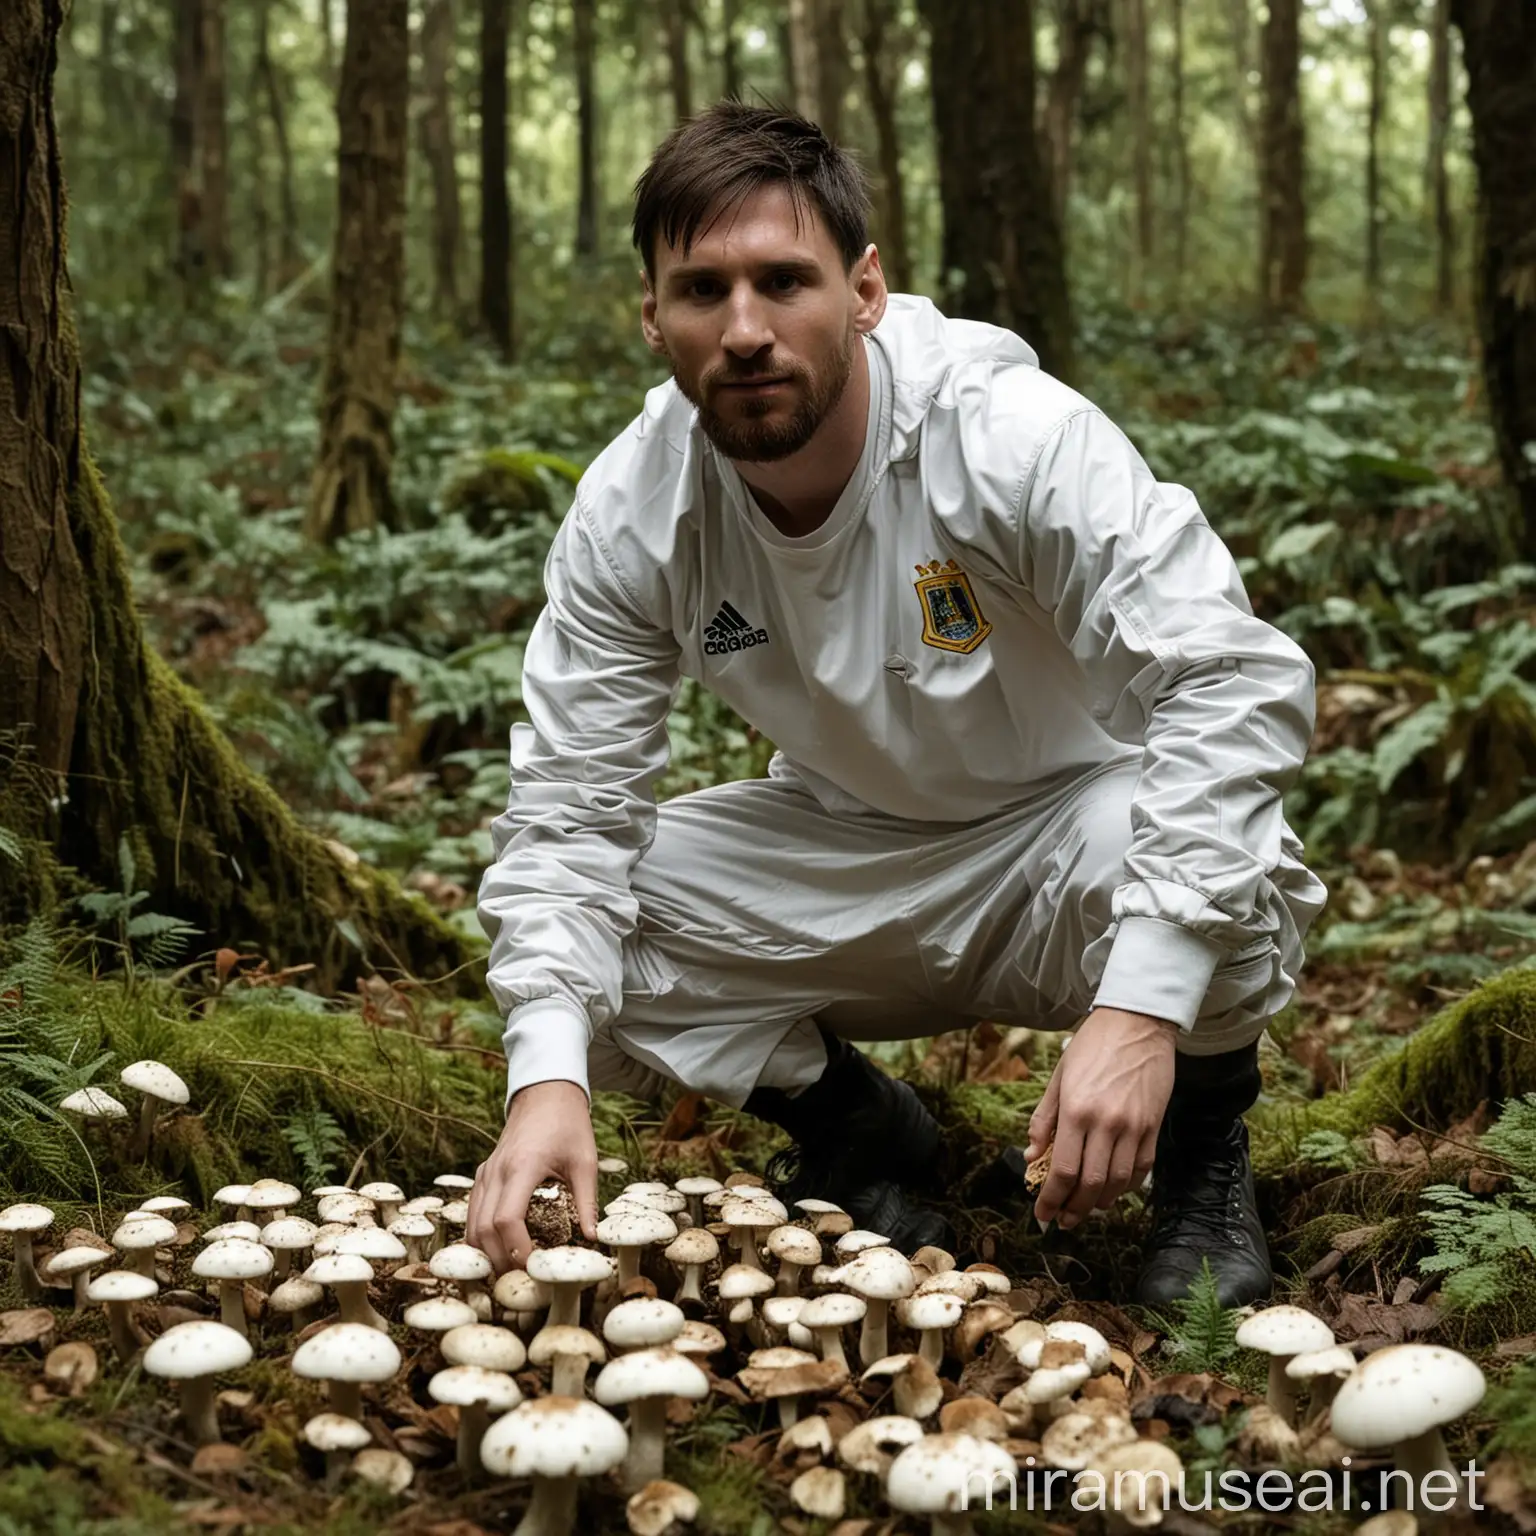 One Lionel Messi with Argentina football dressed harvesting mushrooms, in a big ancient rainforest, with a lot of agaricales mushrooms all white with a lot of scales.